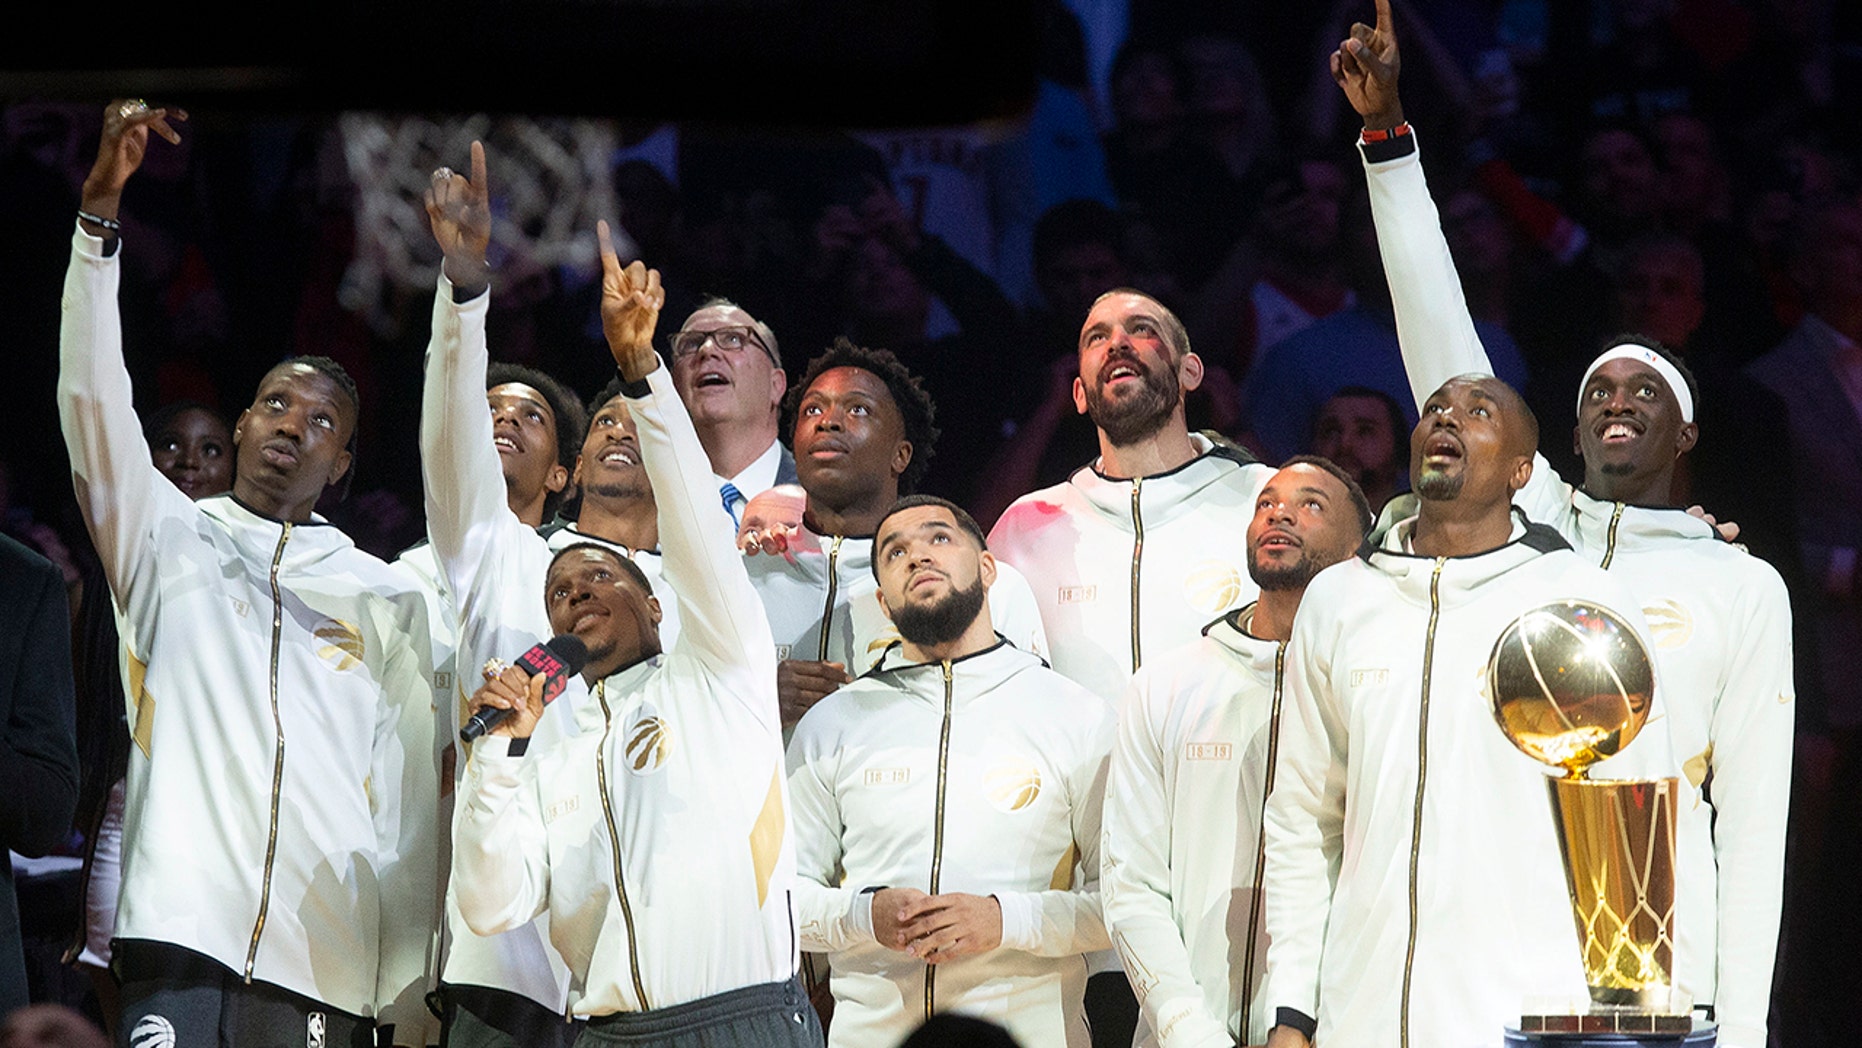 Toronto Raptors watch their 2019 NBA basketball championship pennant being raised before the team's game against the New Orleans Pelican on Tuesday, Oct. 22, 2019, in Toronto. (Chris Young/The Canadian Press via AP)